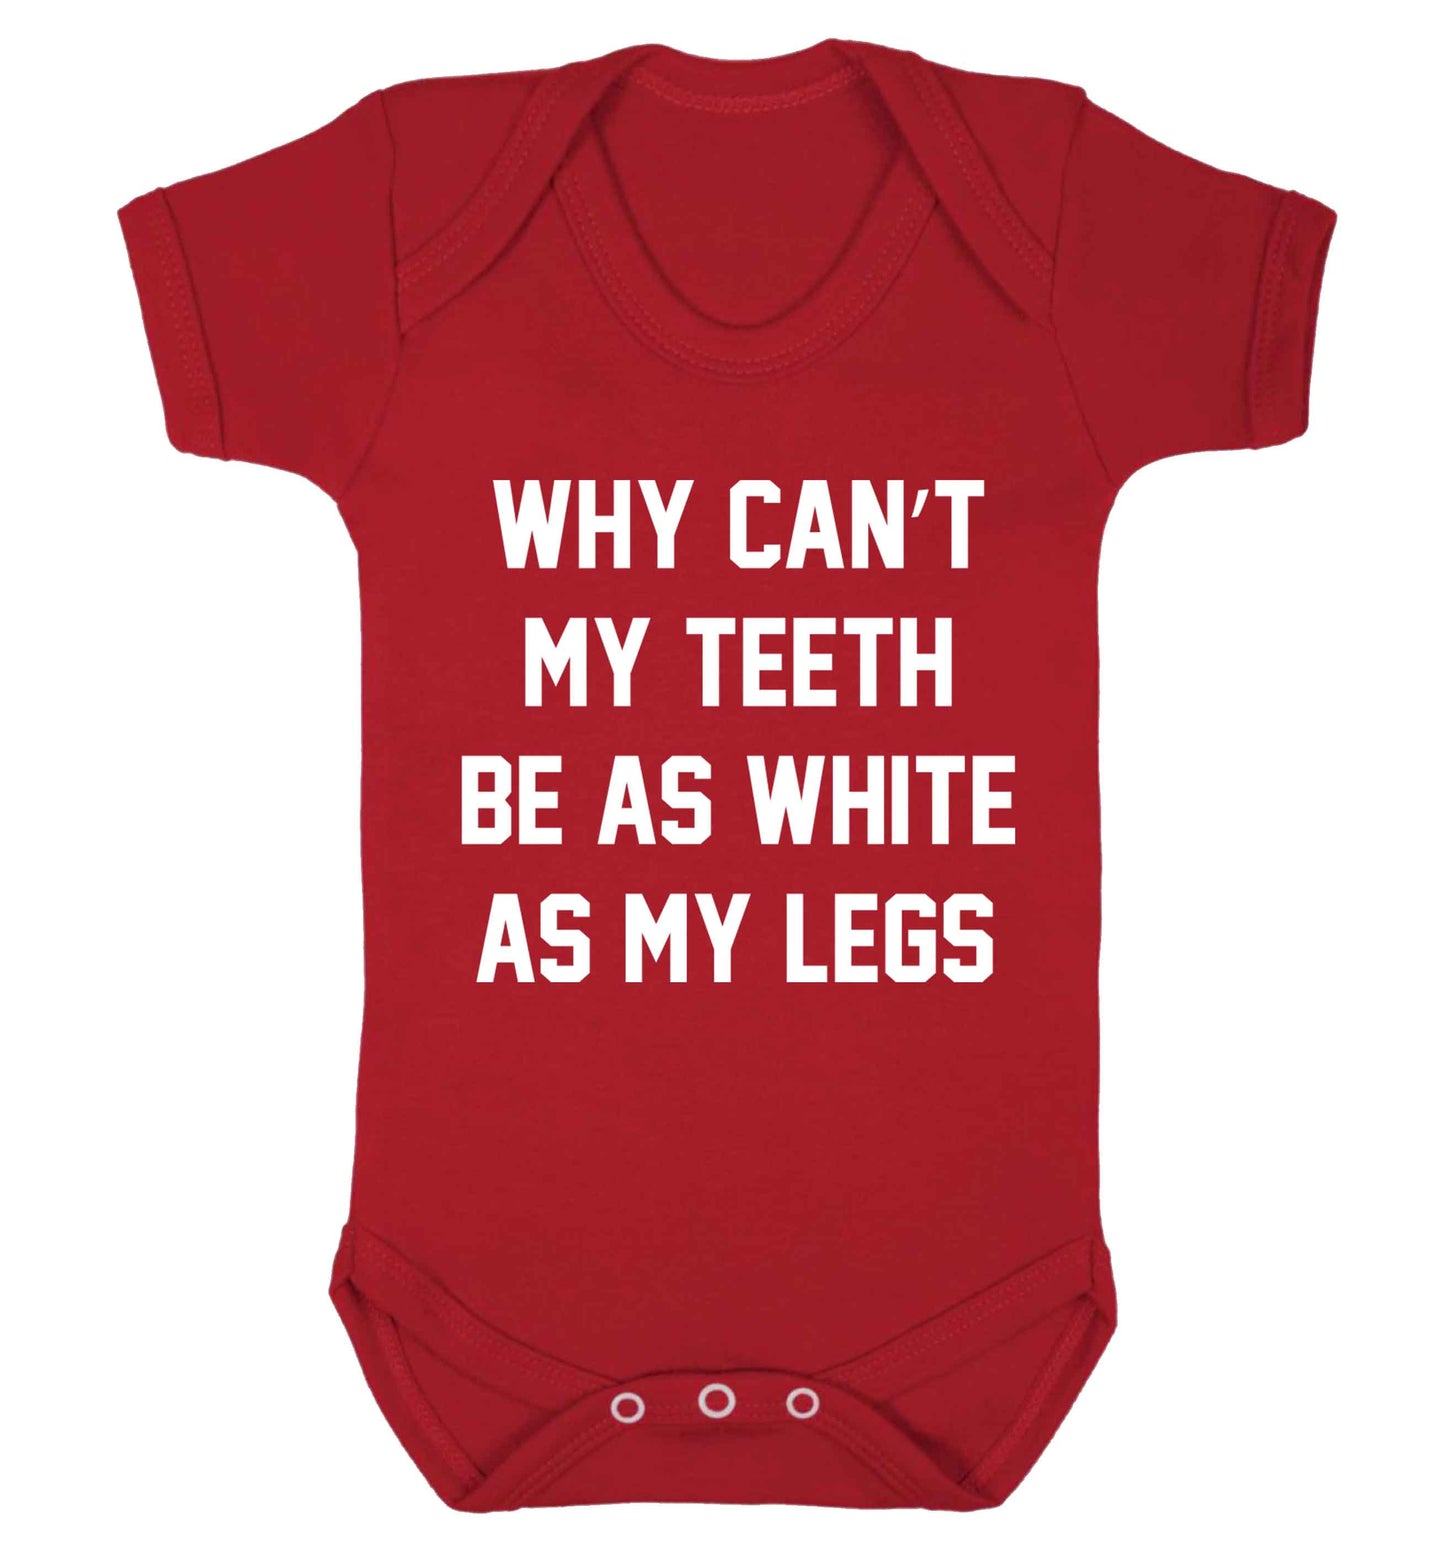 Why can't my teeth be as white as my legs Baby Vest red 18-24 months